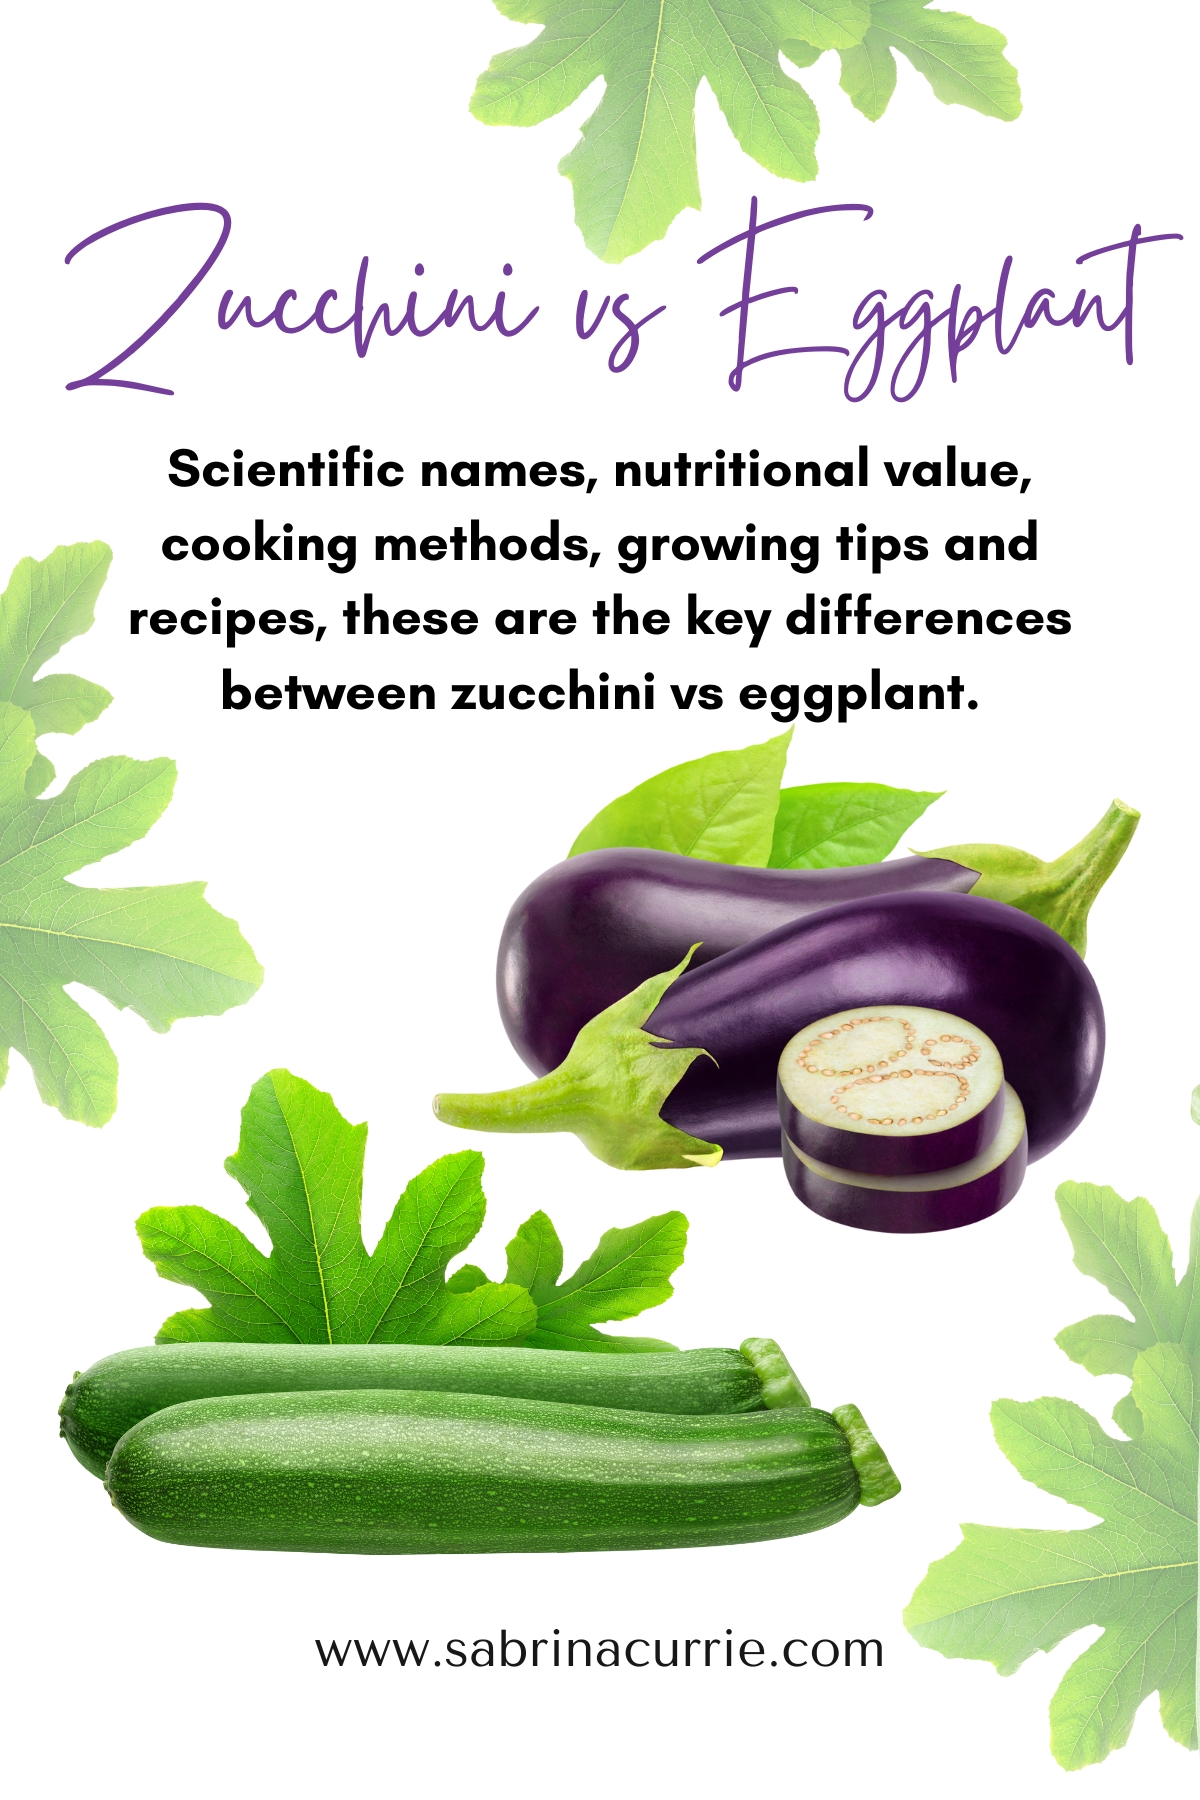 Tall image with title, zucchini vs eggplant, above a photo of 2 zucchinis and 2 eggplants.